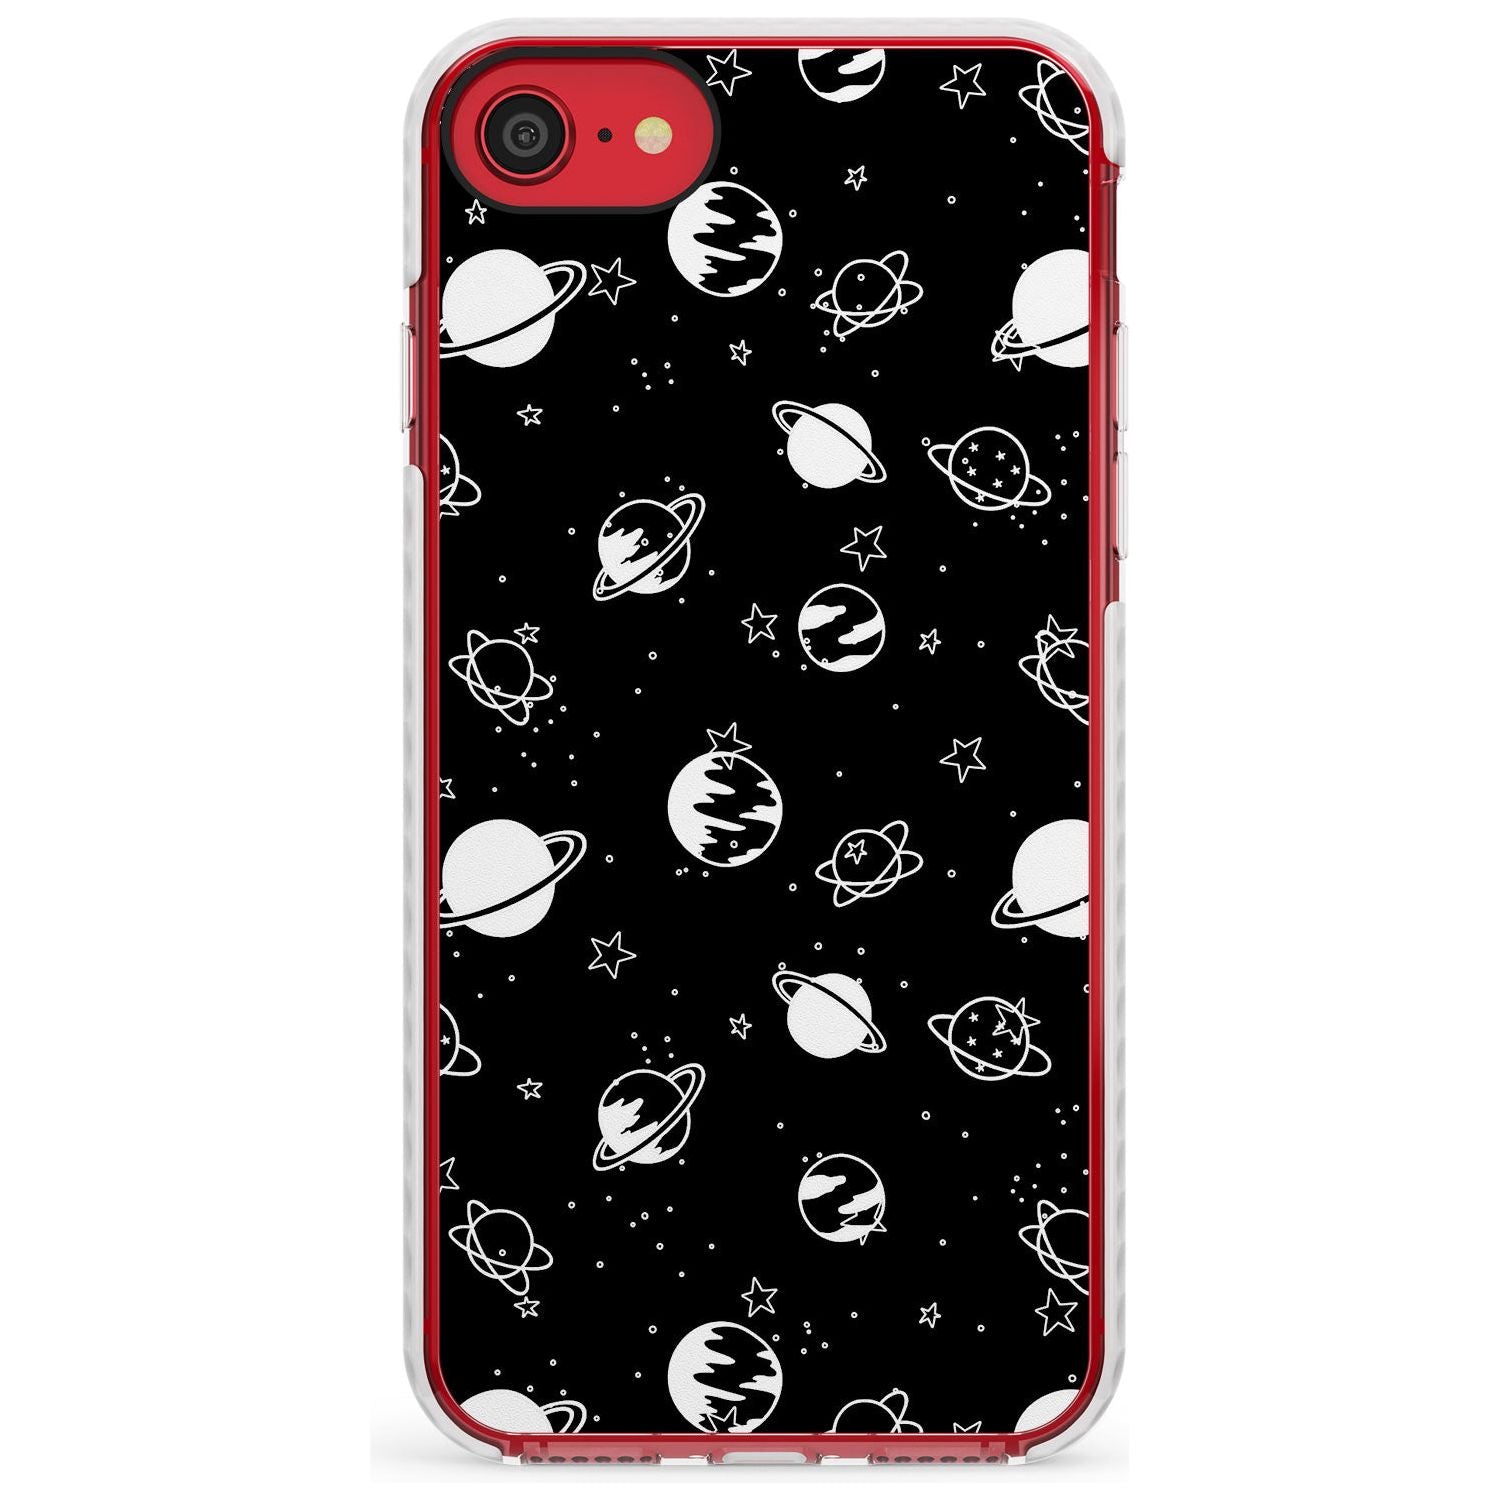 White Planets on Black Slim TPU Phone Case for iPhone SE 8 7 Plus